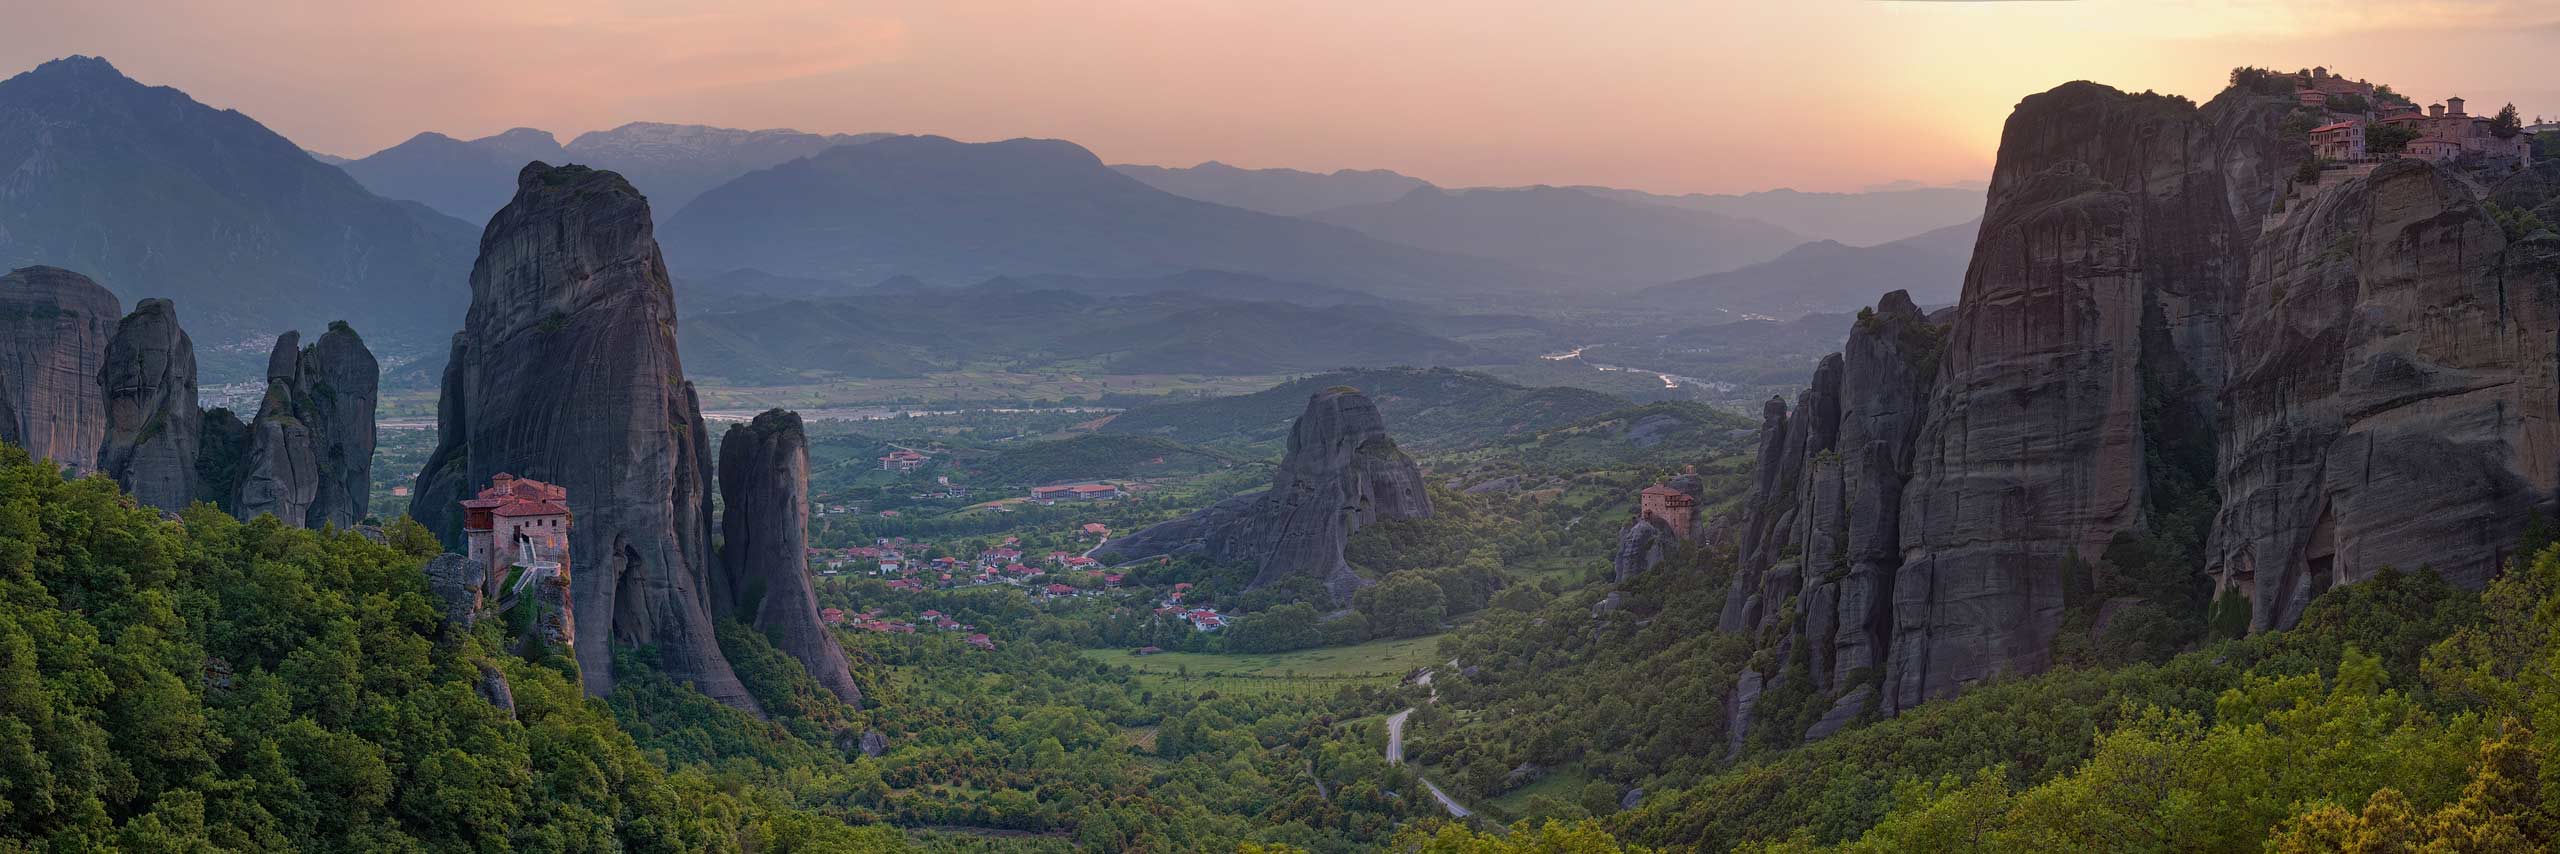 Roussanou and St. Nicholas Anapafsas Monasteries with town of Kastraki on Thessaly valley floor at sunset. Meteora, Greece